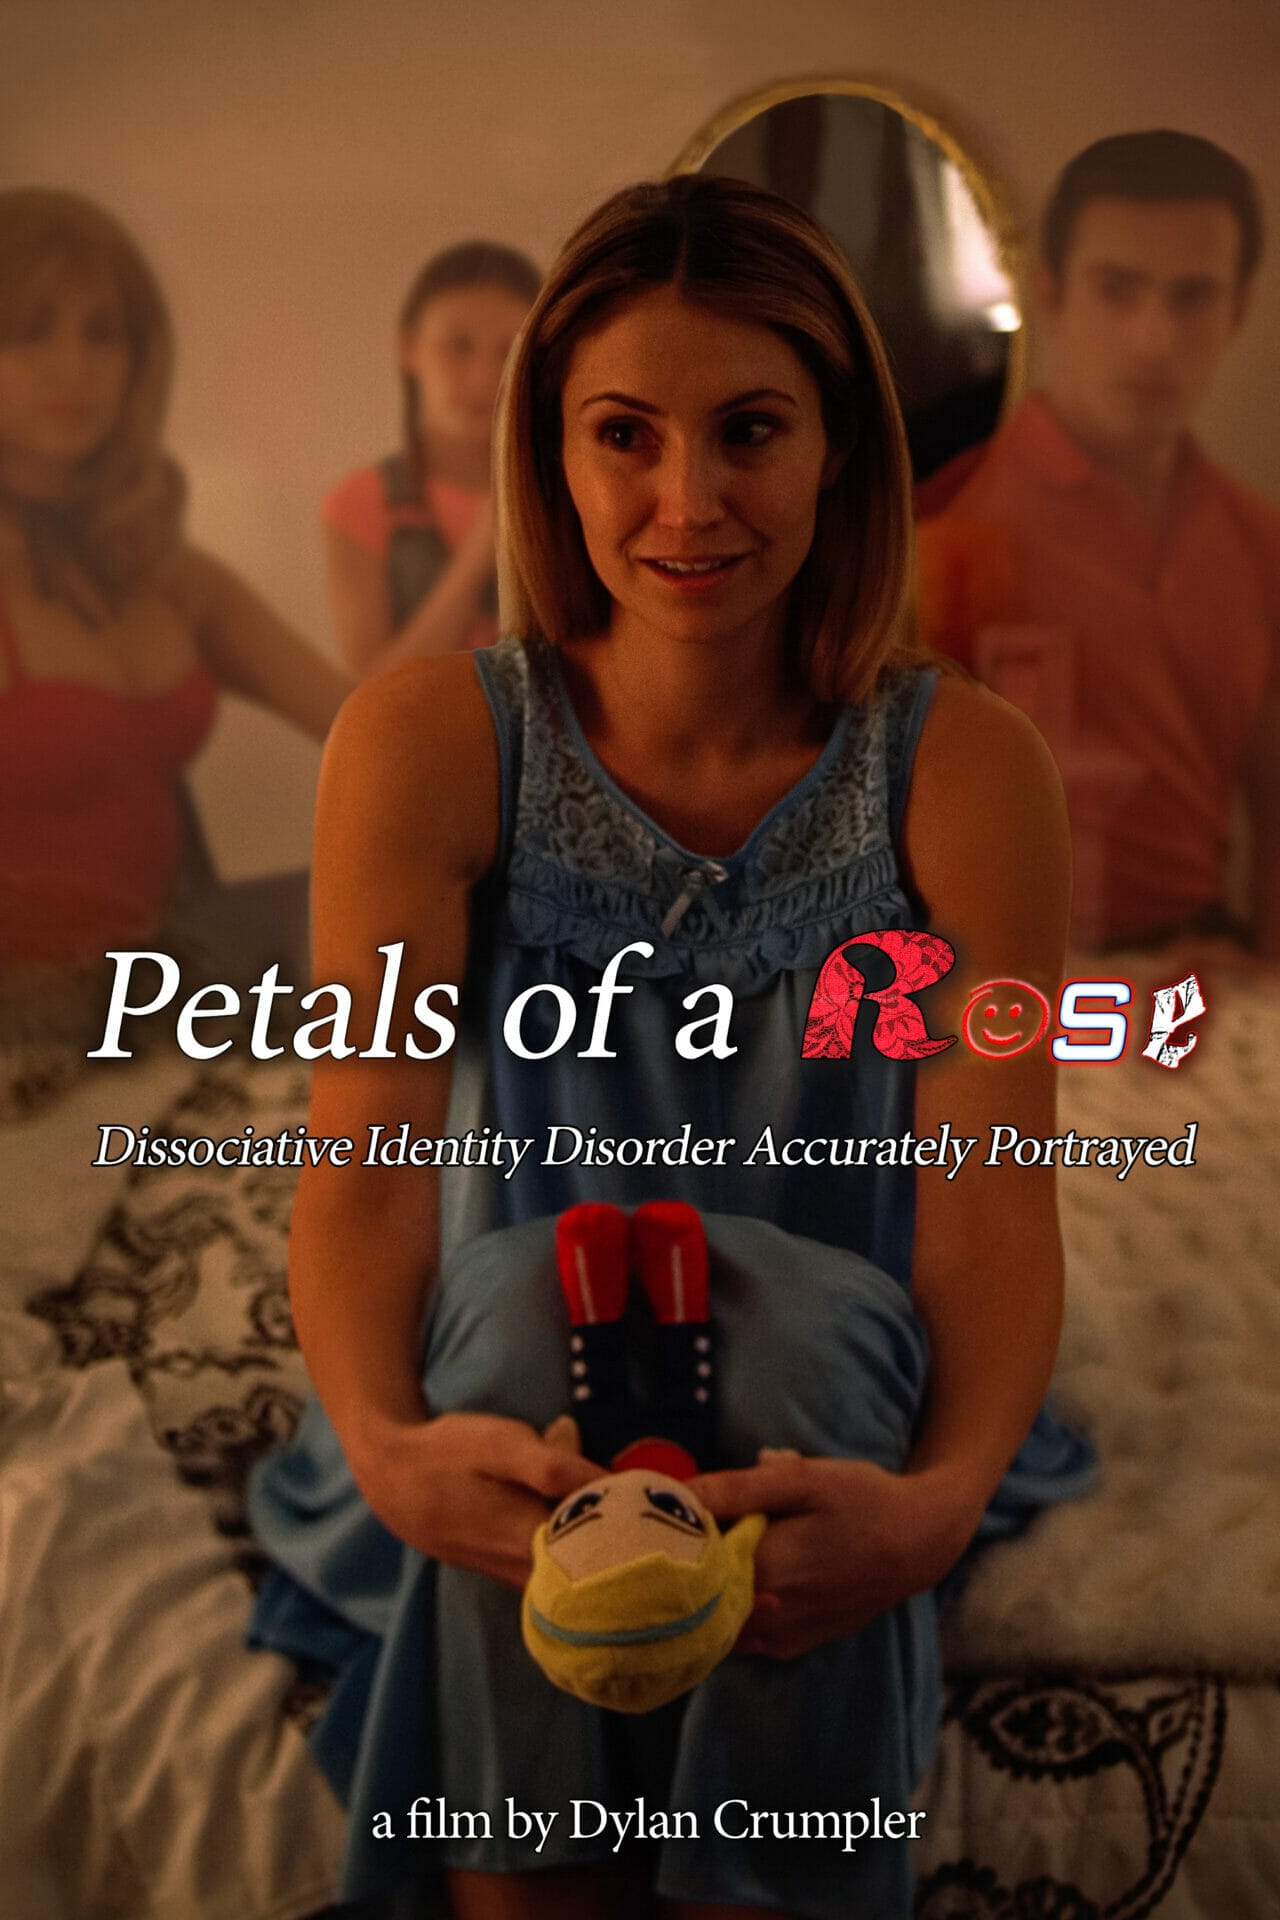 Film poster for Petals of a Rose. Showing the main actrice holding a doll. You can see her parts standing behind her.